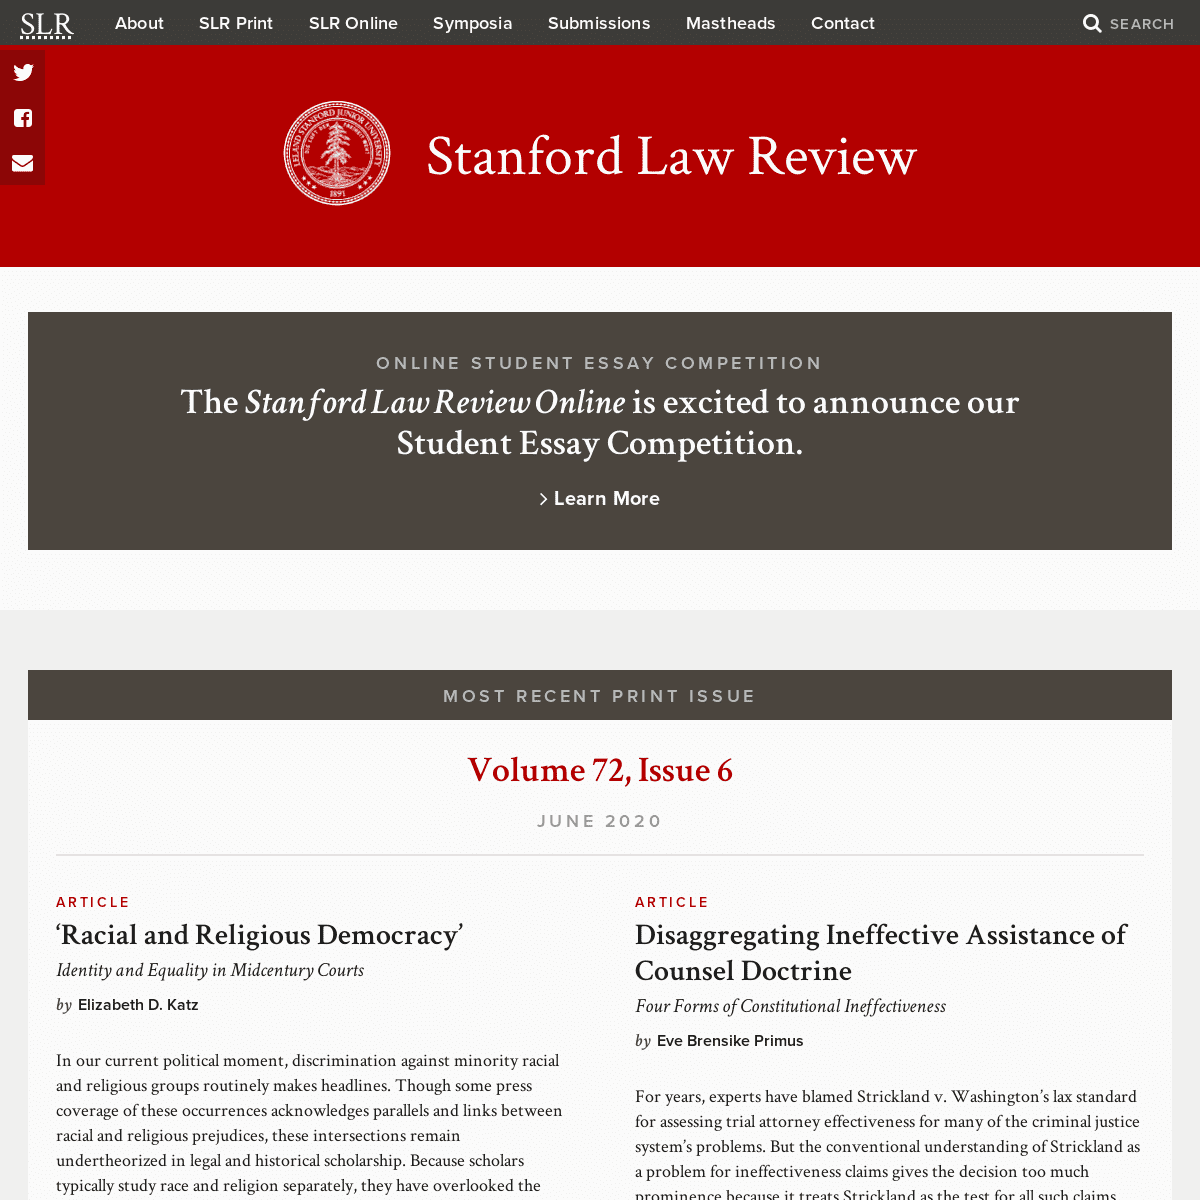 A complete backup of stanfordlawreview.org